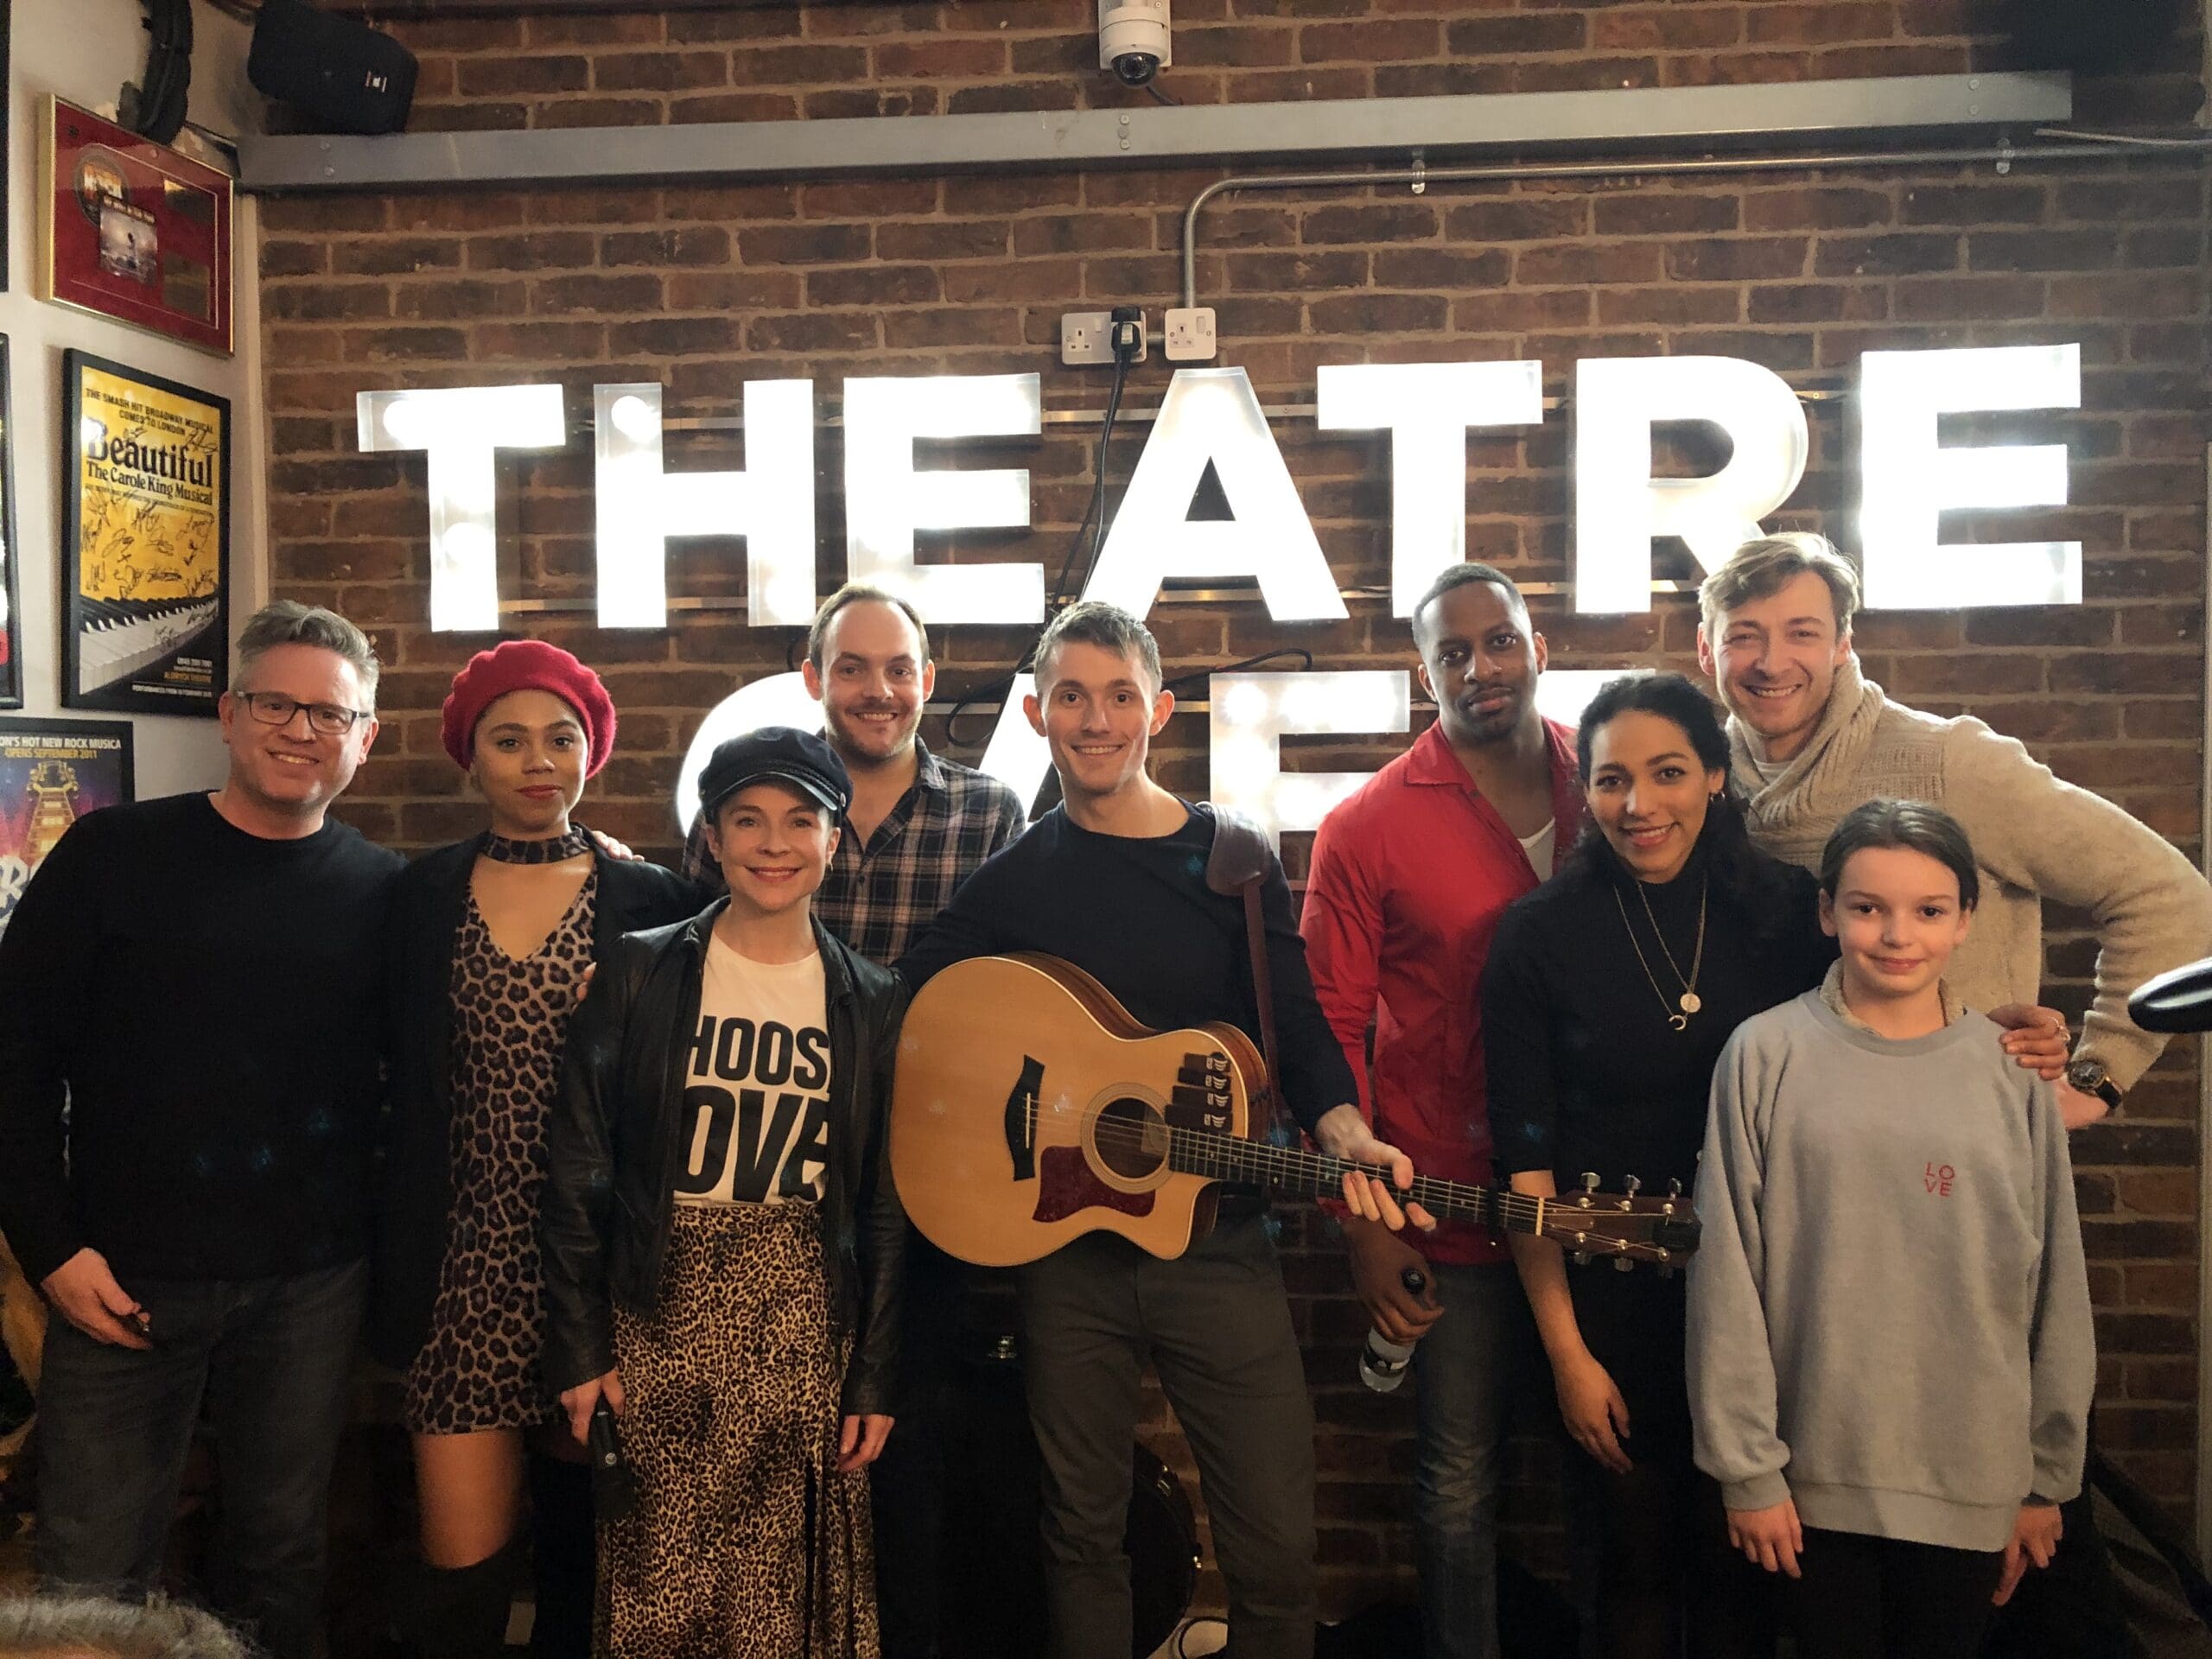 Featured image for “The cast of Violet performed a sensational acoustic set at The Theatre Cafe”